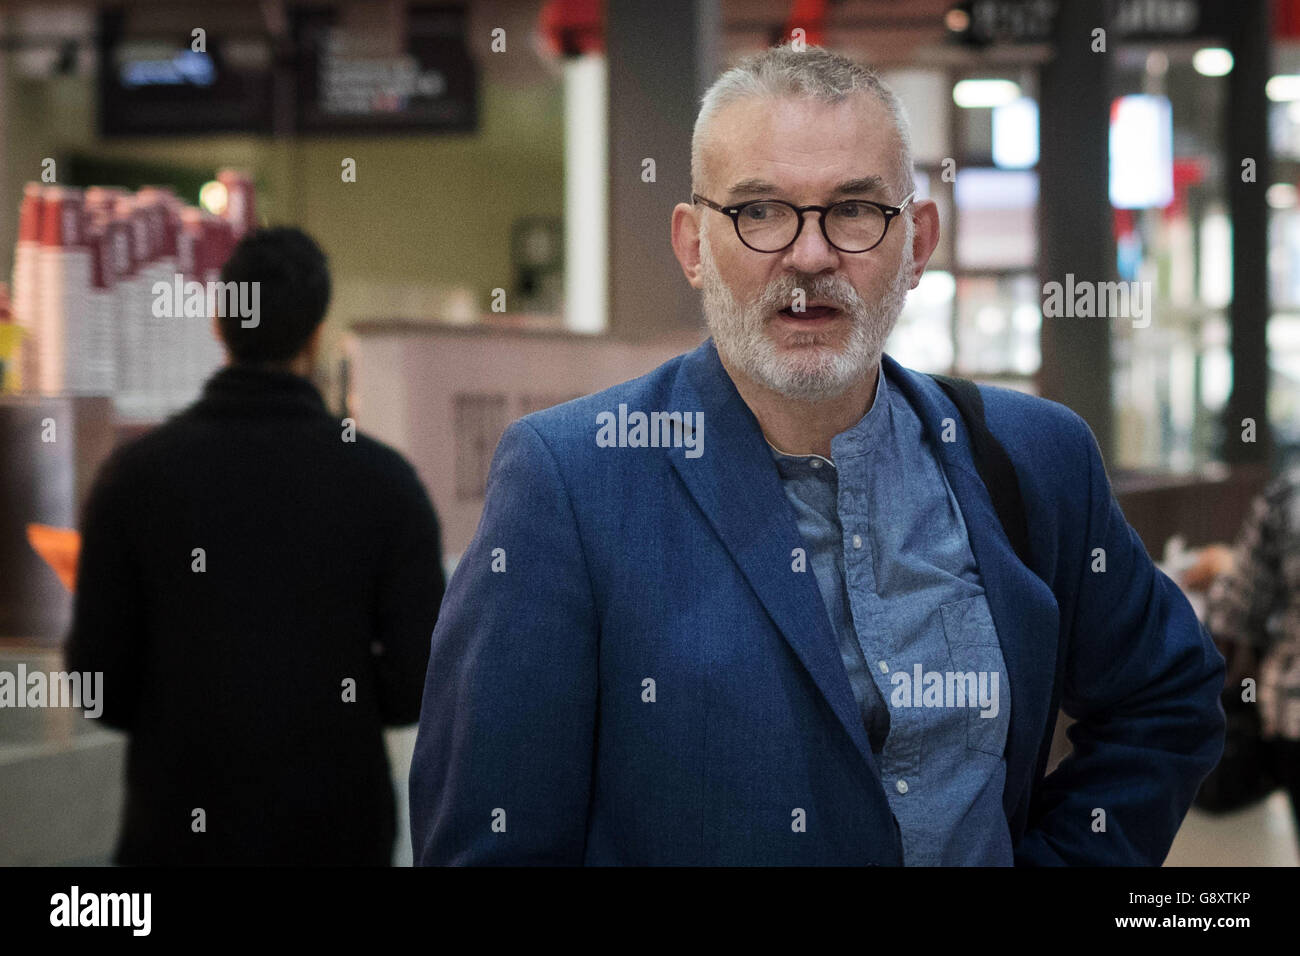 Conservative London Assembly member Andrew Boff arrives at the ExCel Centre in east London for the count for Thursday's elections in the capital for a mayor and members of the London Assembly. Stock Photo